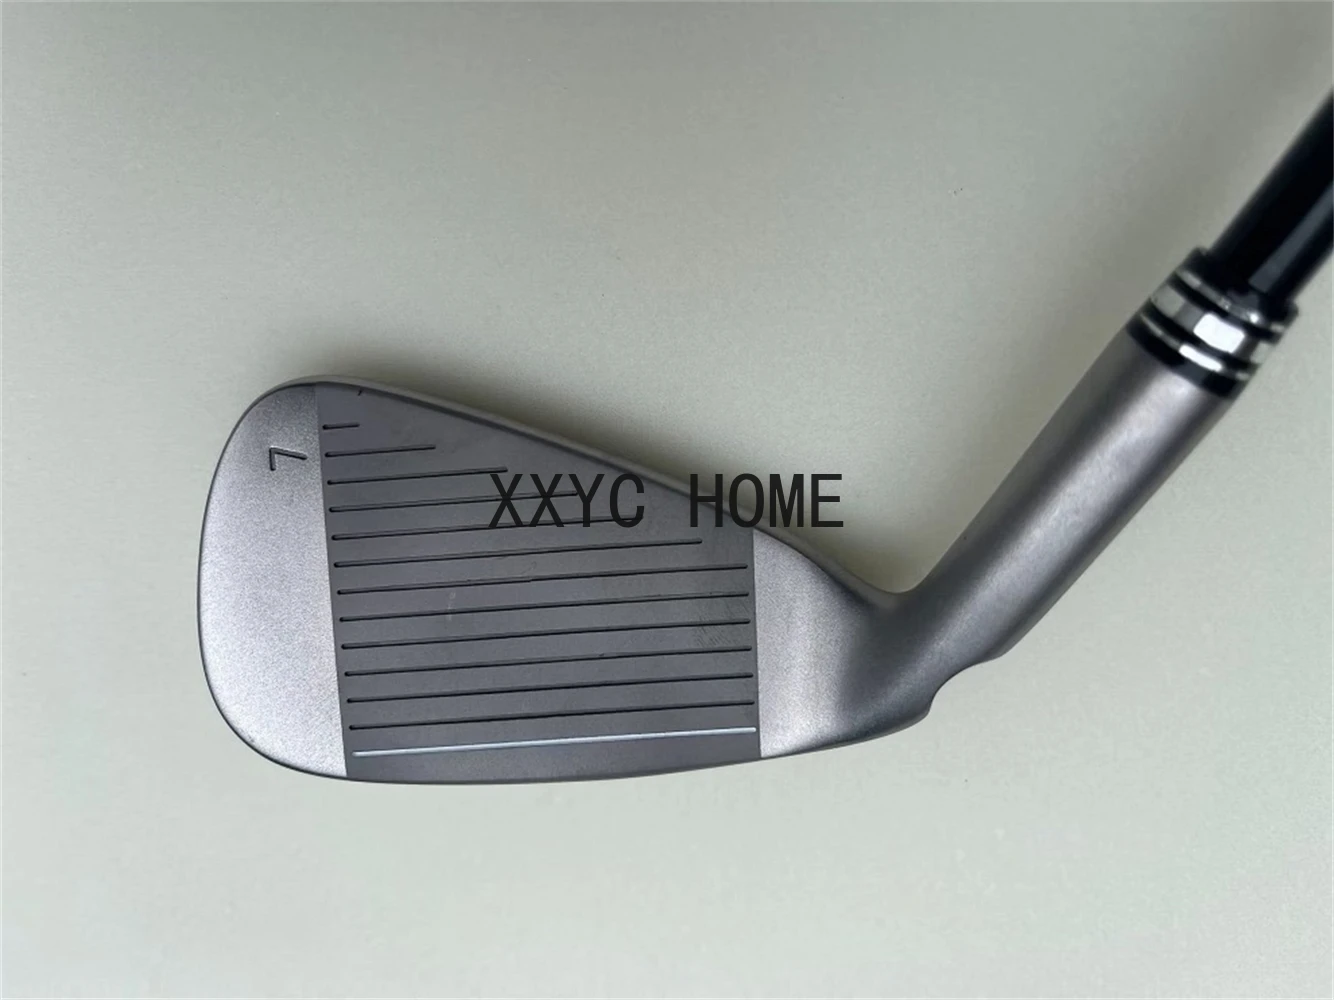 

7PCS 4-3-0 Model Forged Golf Clubs Irons Set 4-9W R/S Steel/Graphite Shafts Including Headcovers Quick Shipping-8